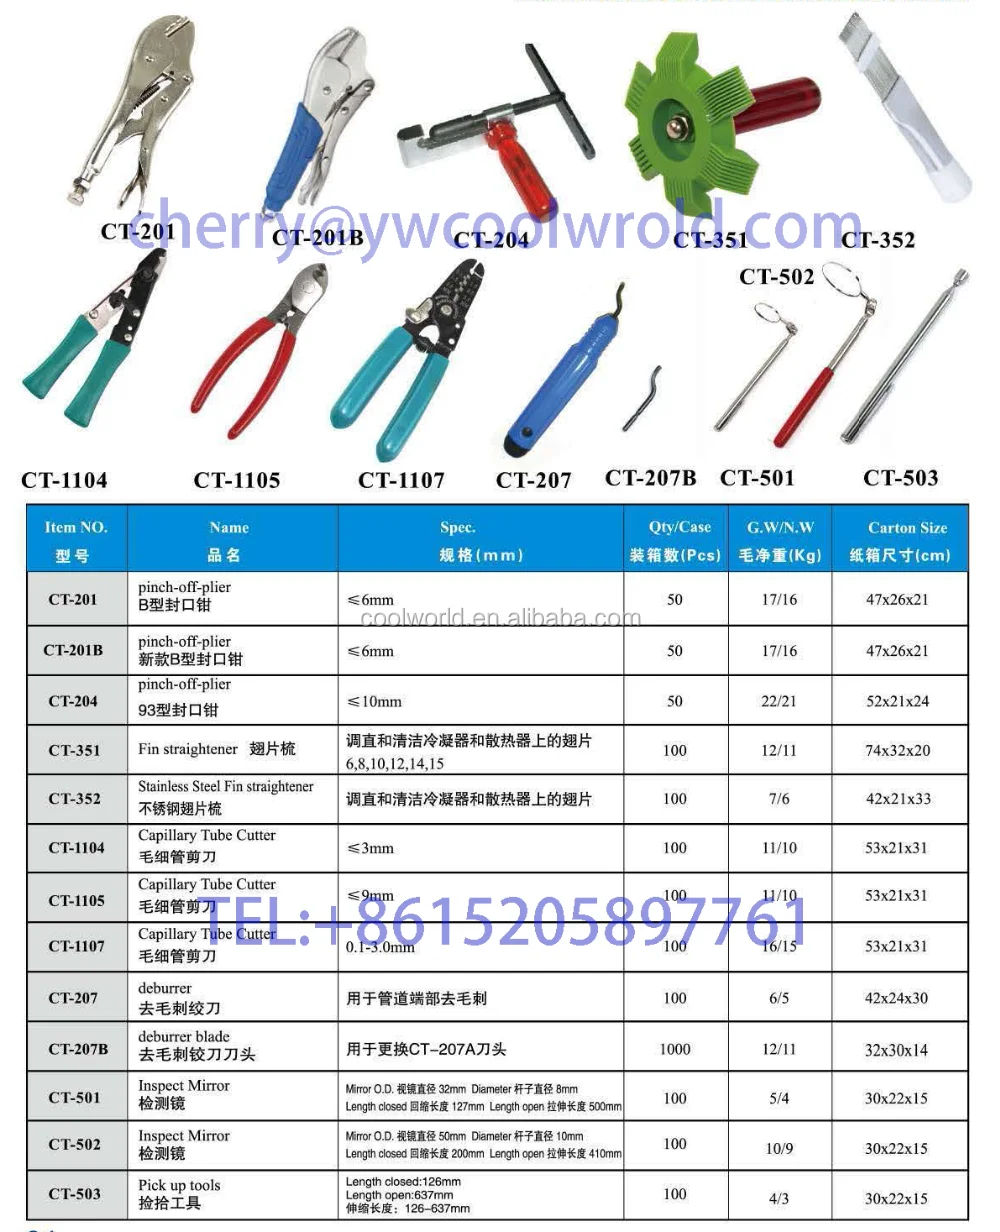 Model CT-1107 Capillary Tube Cutter for HVAC and Refrigeration